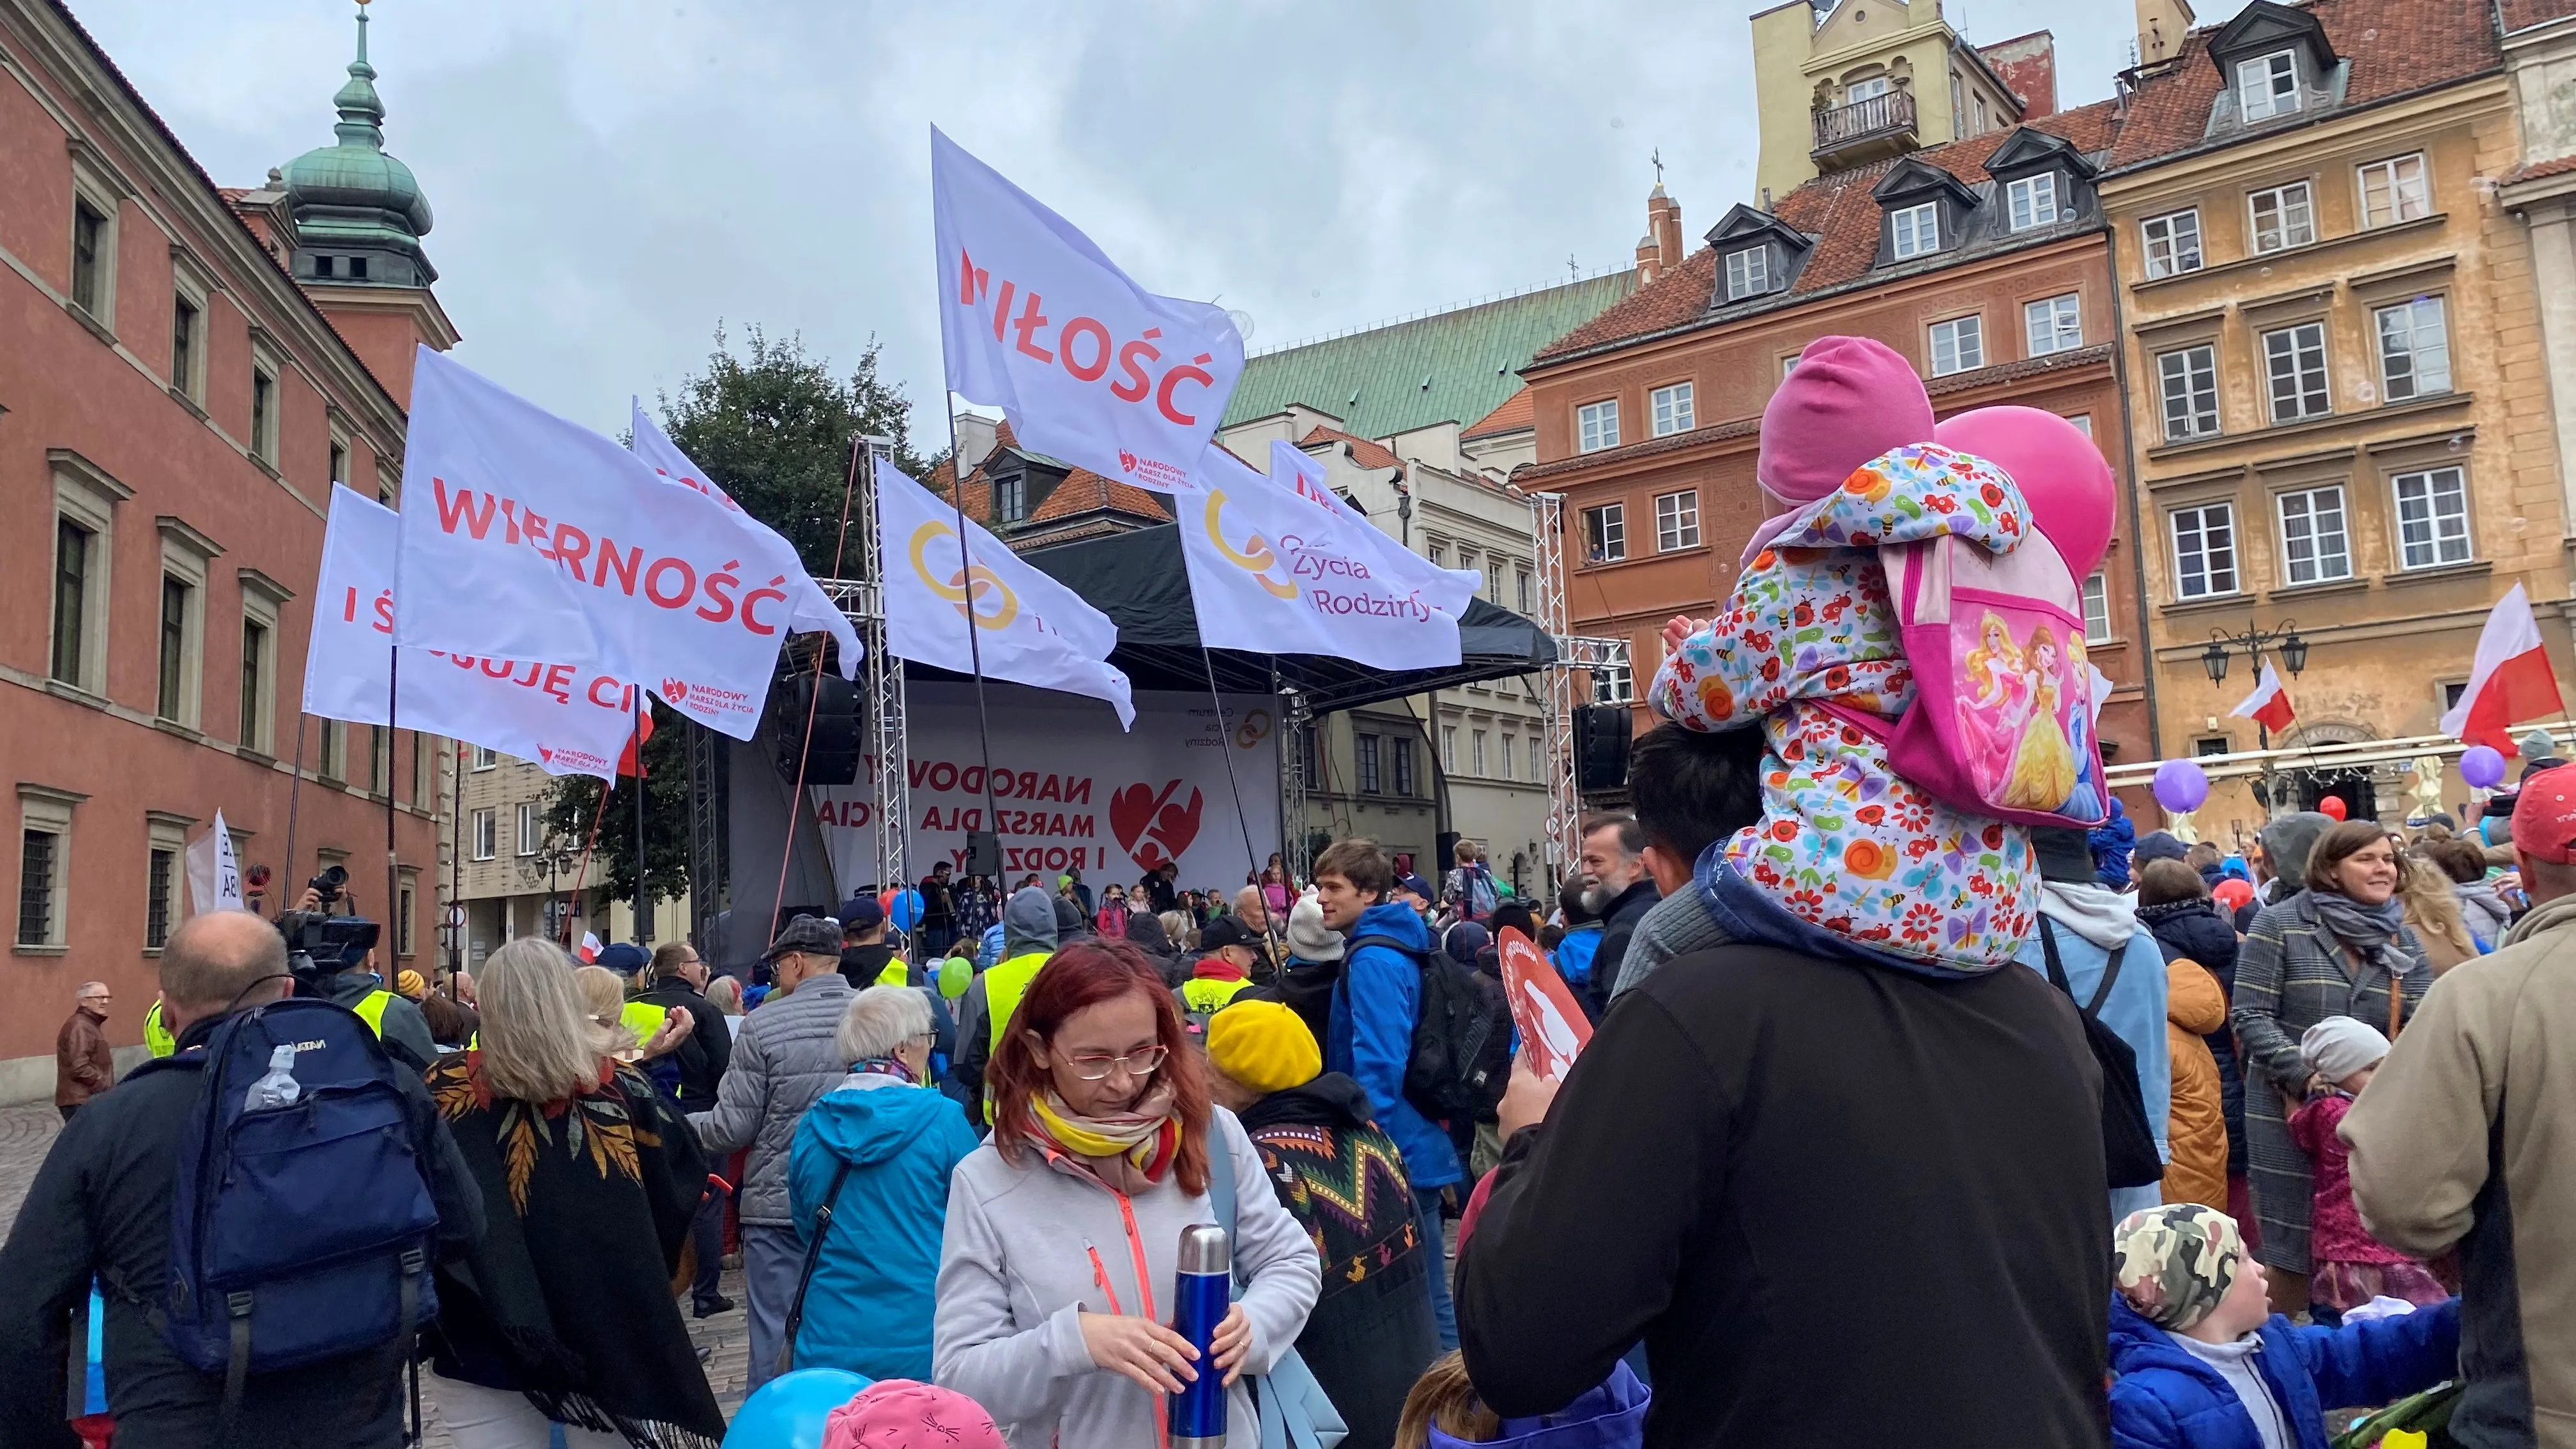 March for Life and Family in Warsaw, Poland, Sept. 19, 2022.?w=200&h=150